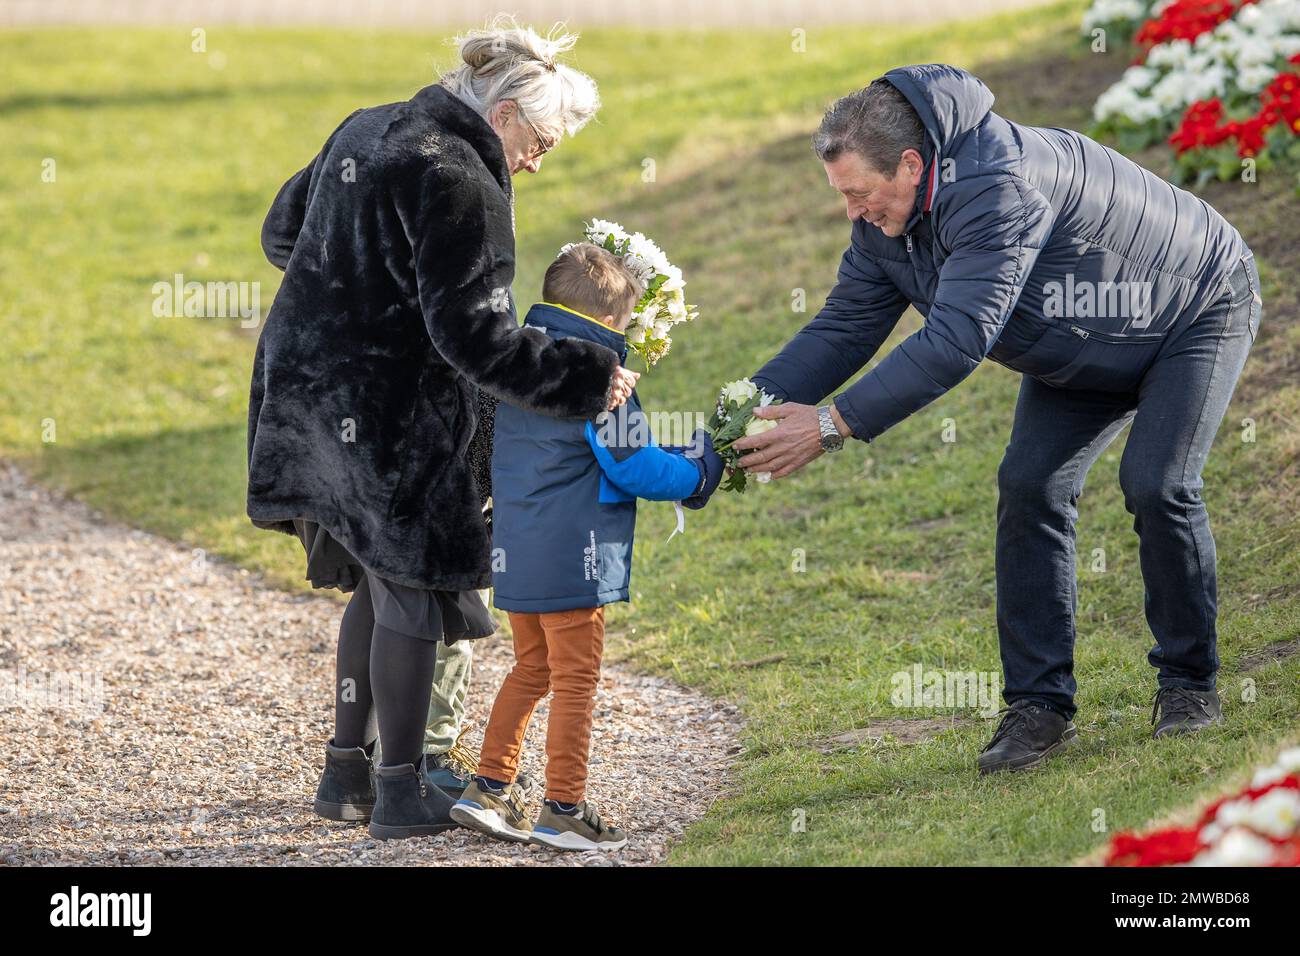 OUWERKERK, THE NETHERLANDS - FEBRUARI 1: Young and old bringing flowers to the memorial during The Flood of 1953 Commemoration at The Watersnoodmuseum (Flood Museum) on February 1st, 2023 in Ouwerkerk, Netherlands (Photo by Peter van der Klooster/Orange Pictures) Stock Photo